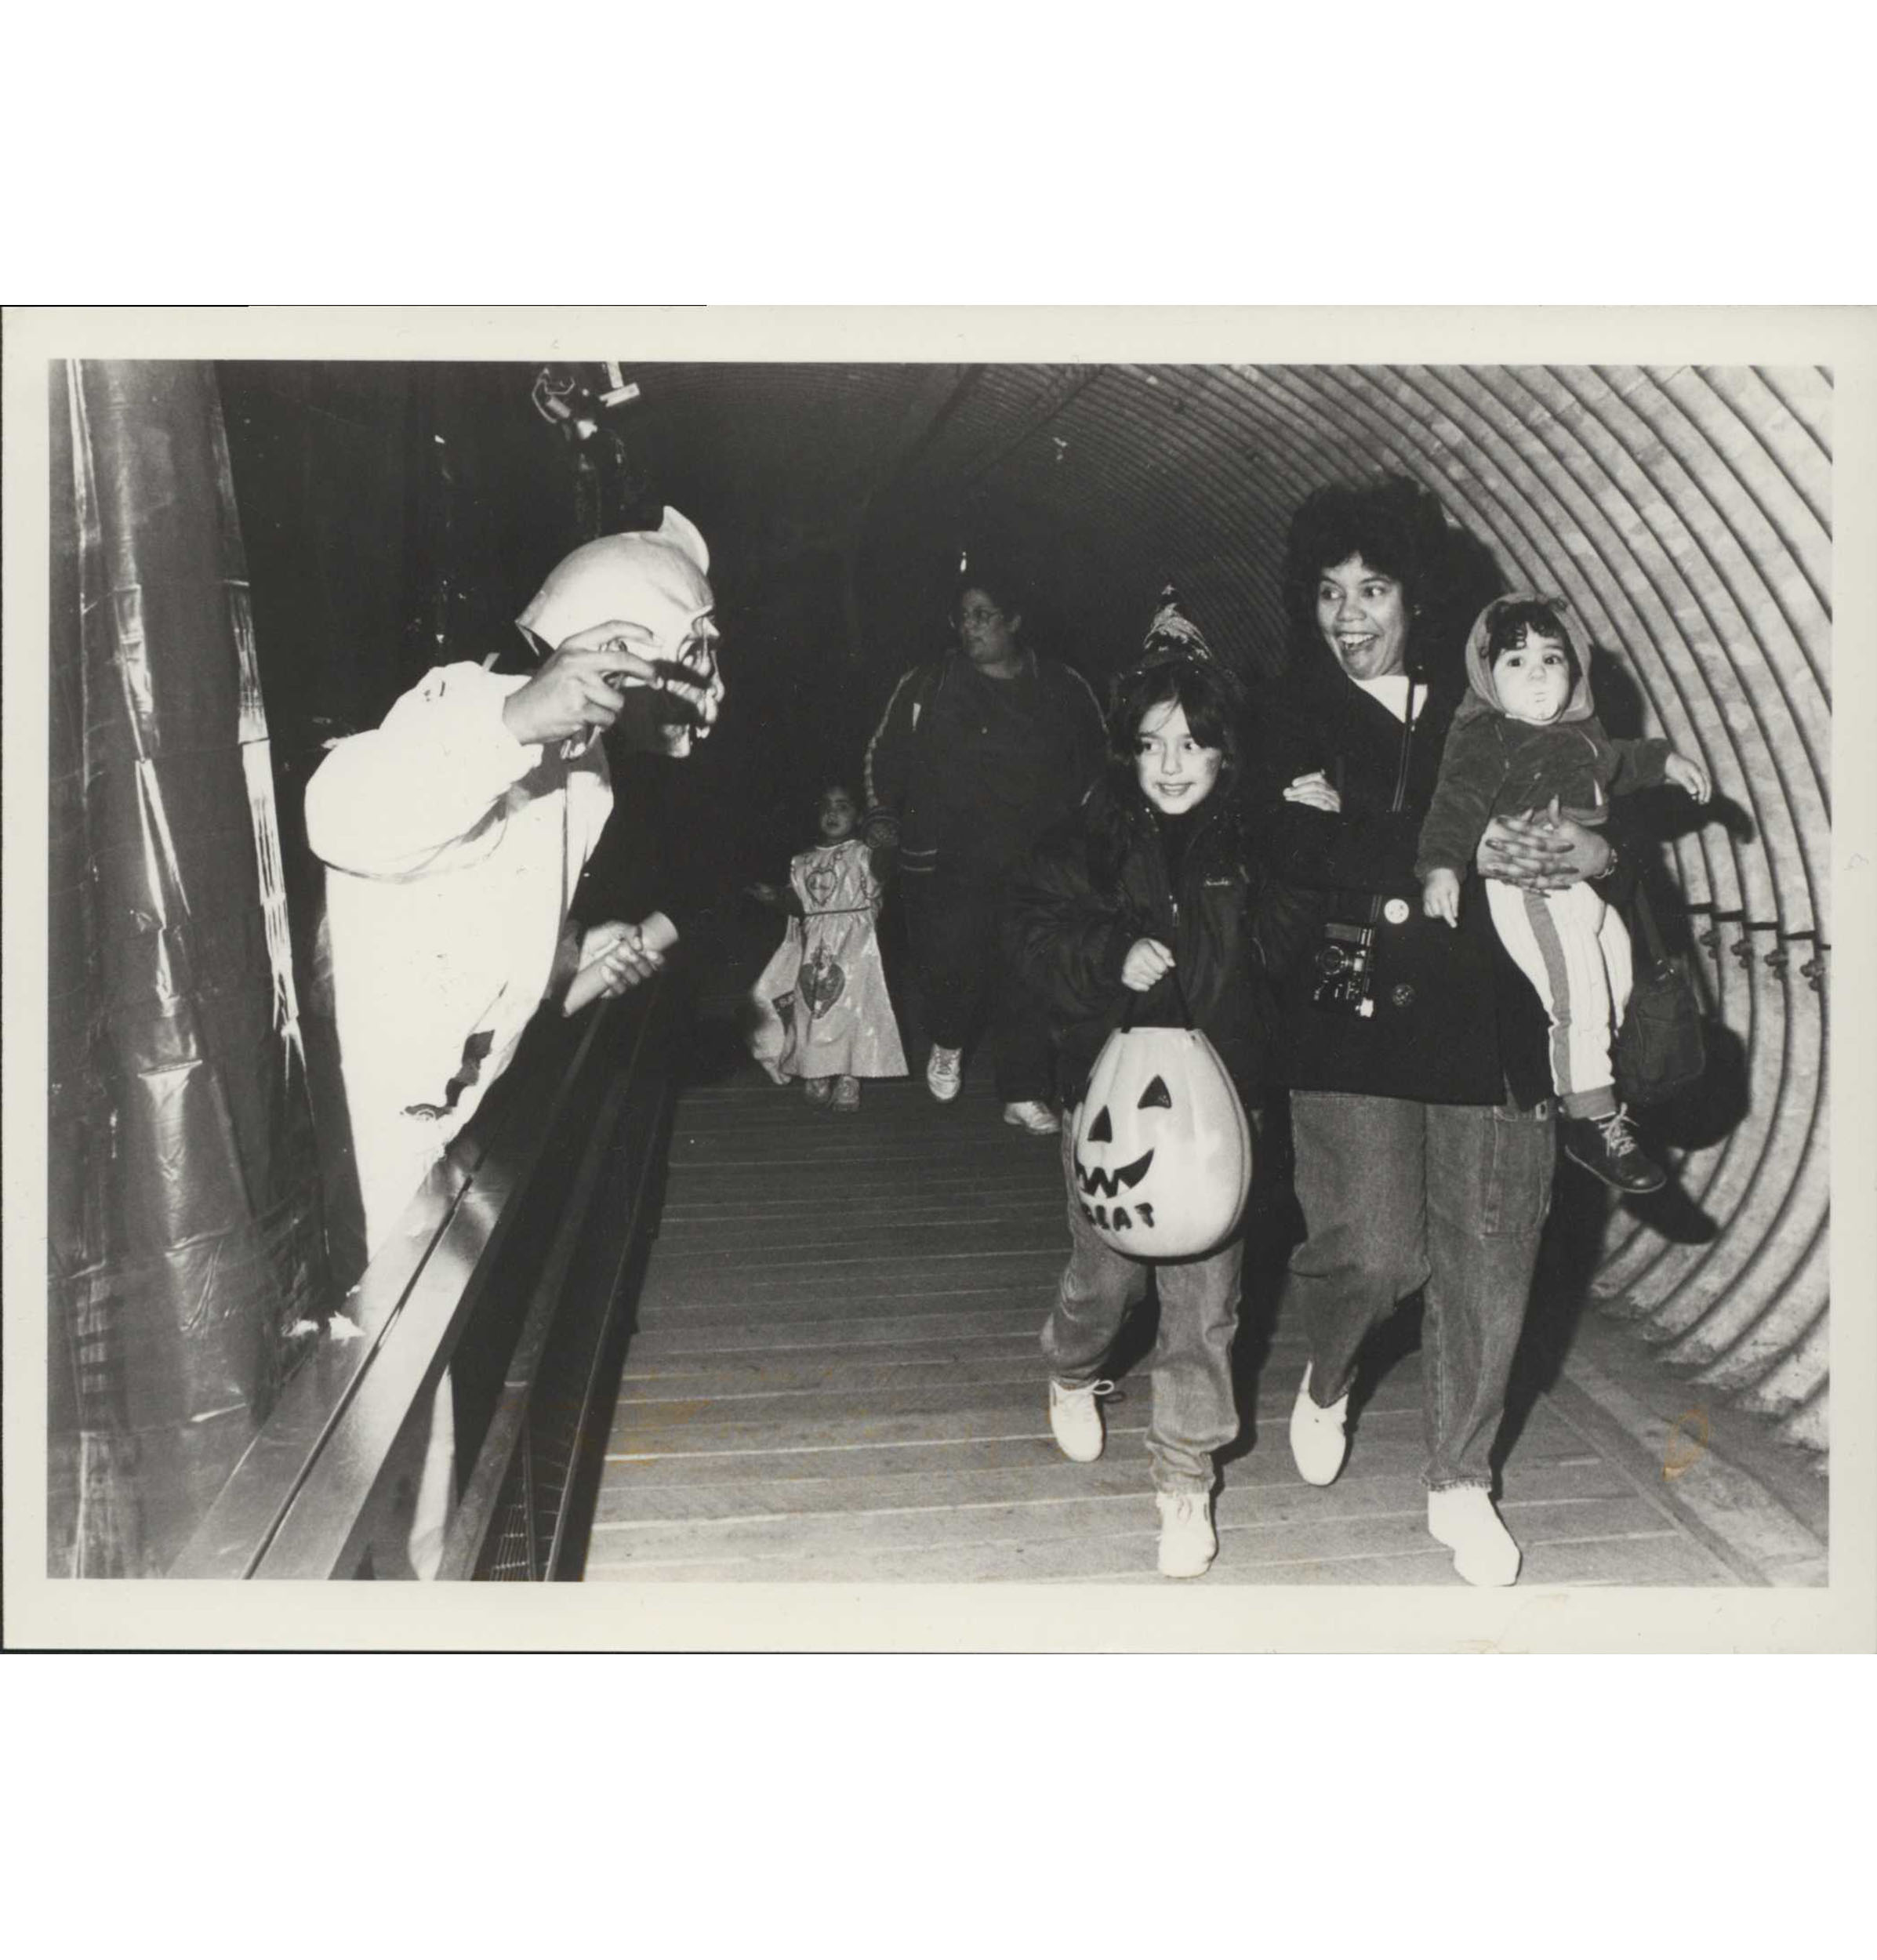 A black and white photograph of a smiling woman holding a small child and another child holding the woman's hand with a jack-o-lantern bag in her other. On the left, a person dressed in a costume jumps out from behind curtains to suprise passerby.